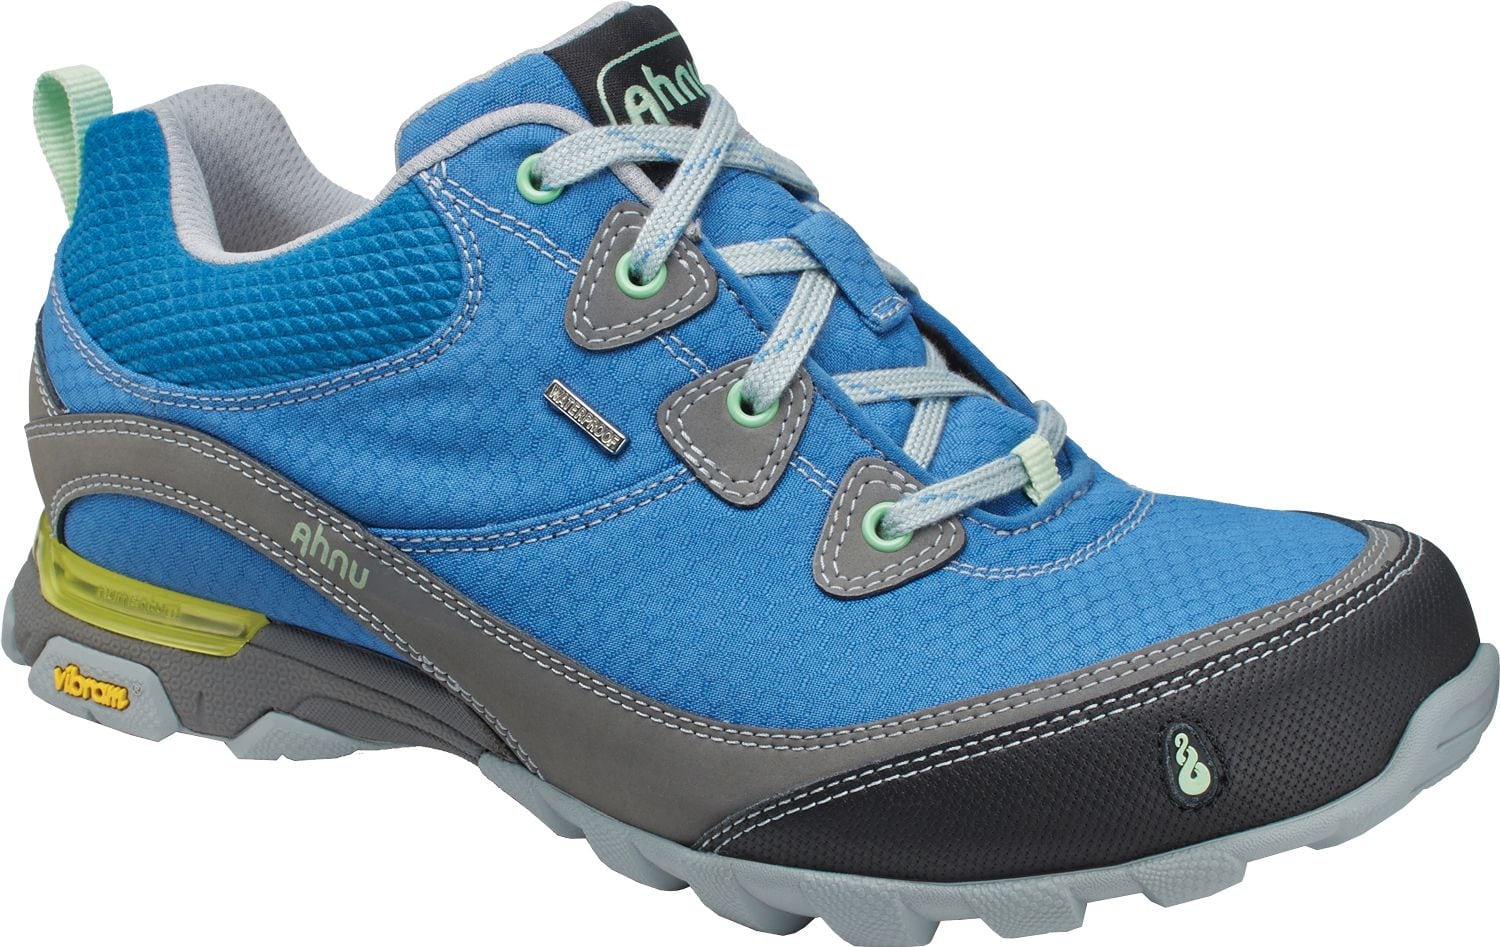 Best Hiking Shoes for Women 2020 